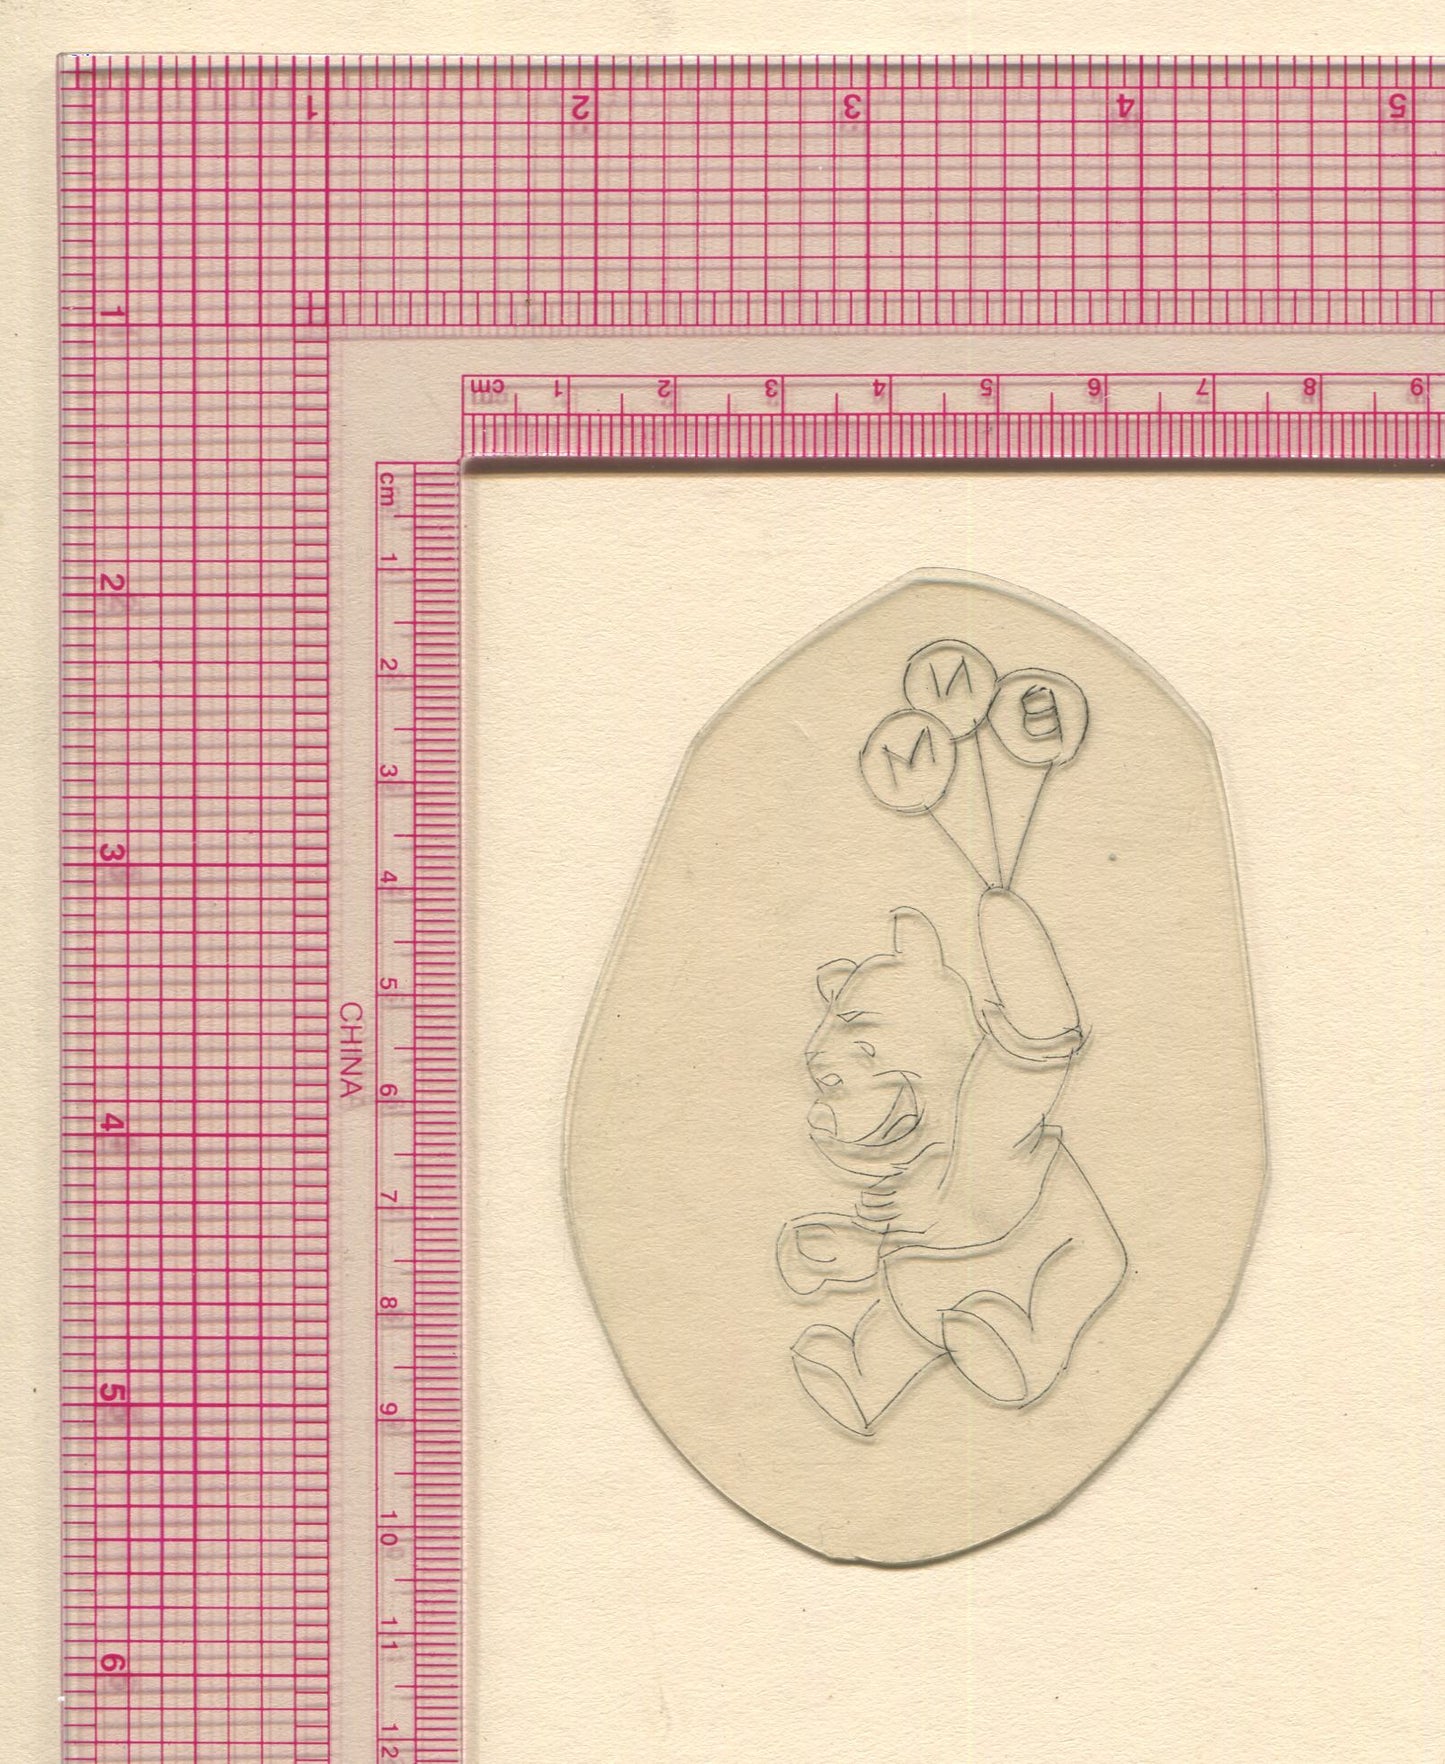 Pooh Bear Vintage Traditional Tattoo Acetate Stencil from Bert Grimm's Shop